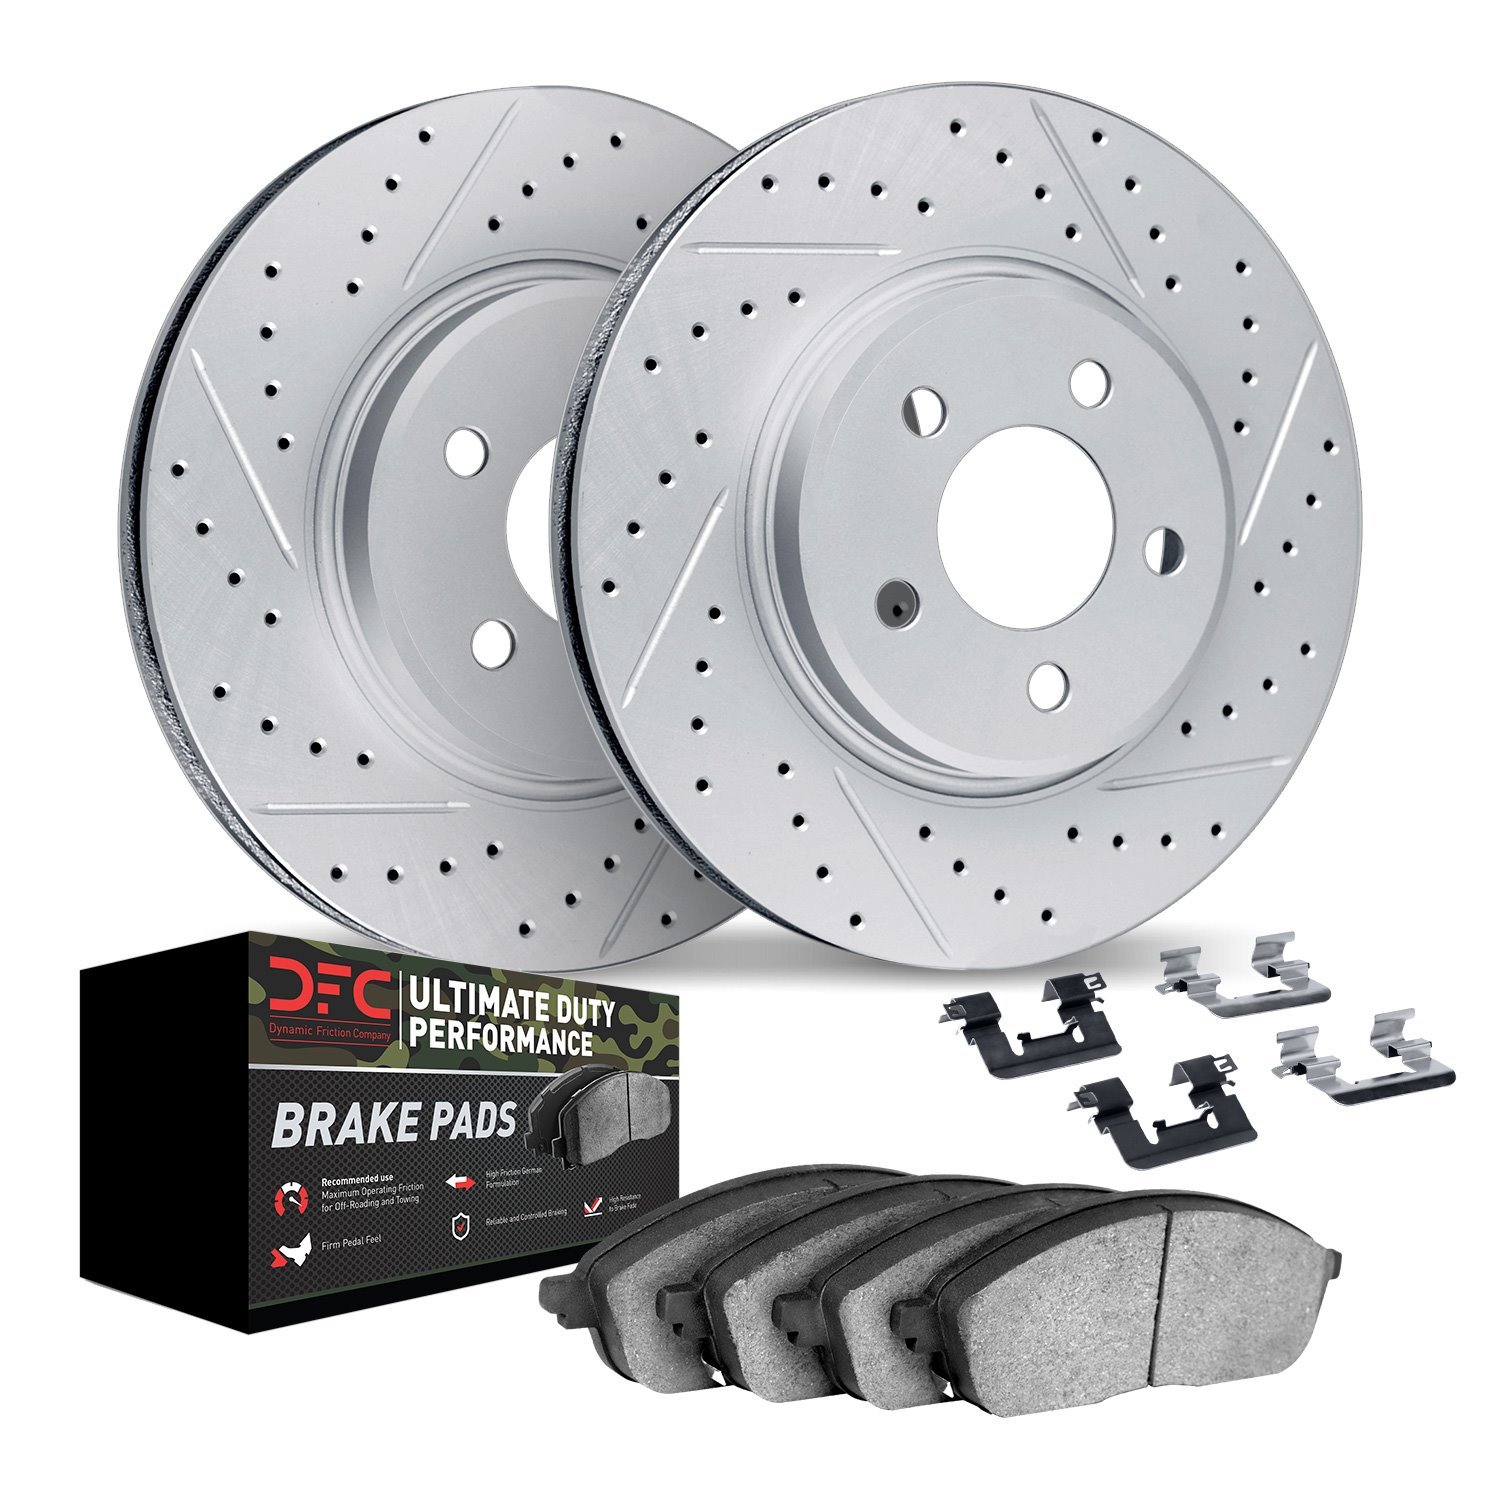 2412-54042 Geoperformance Drilled/Slotted Brake Rotors with Ultimate-Duty Brake Pads Kit & Hardware, 2002-2005 Ford/Lincoln/Merc